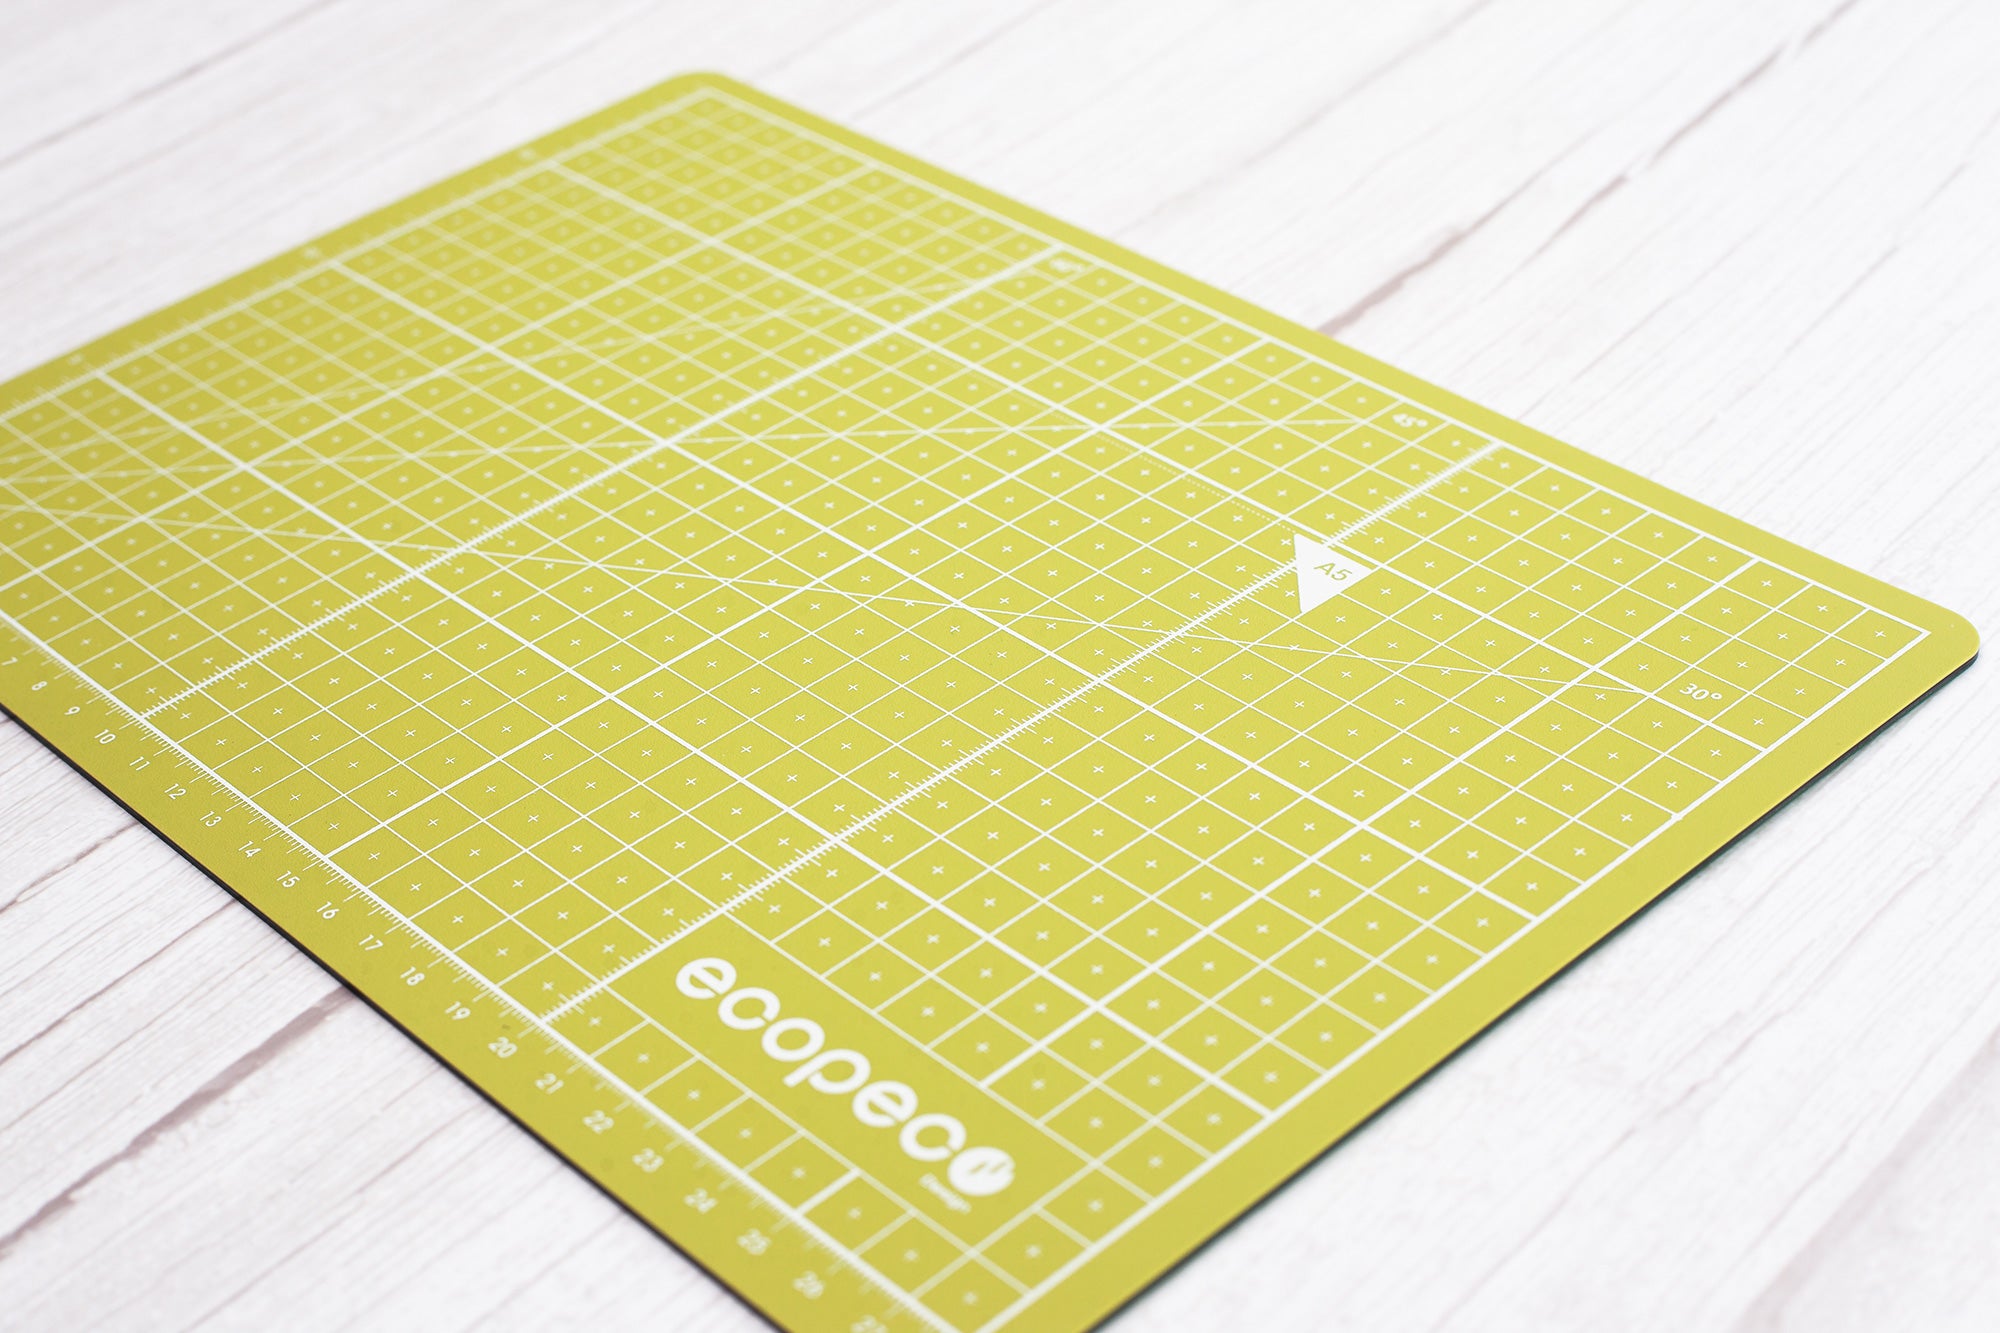 ecopeco cutting mat 18x24 inch version - Shop ecopeco Other